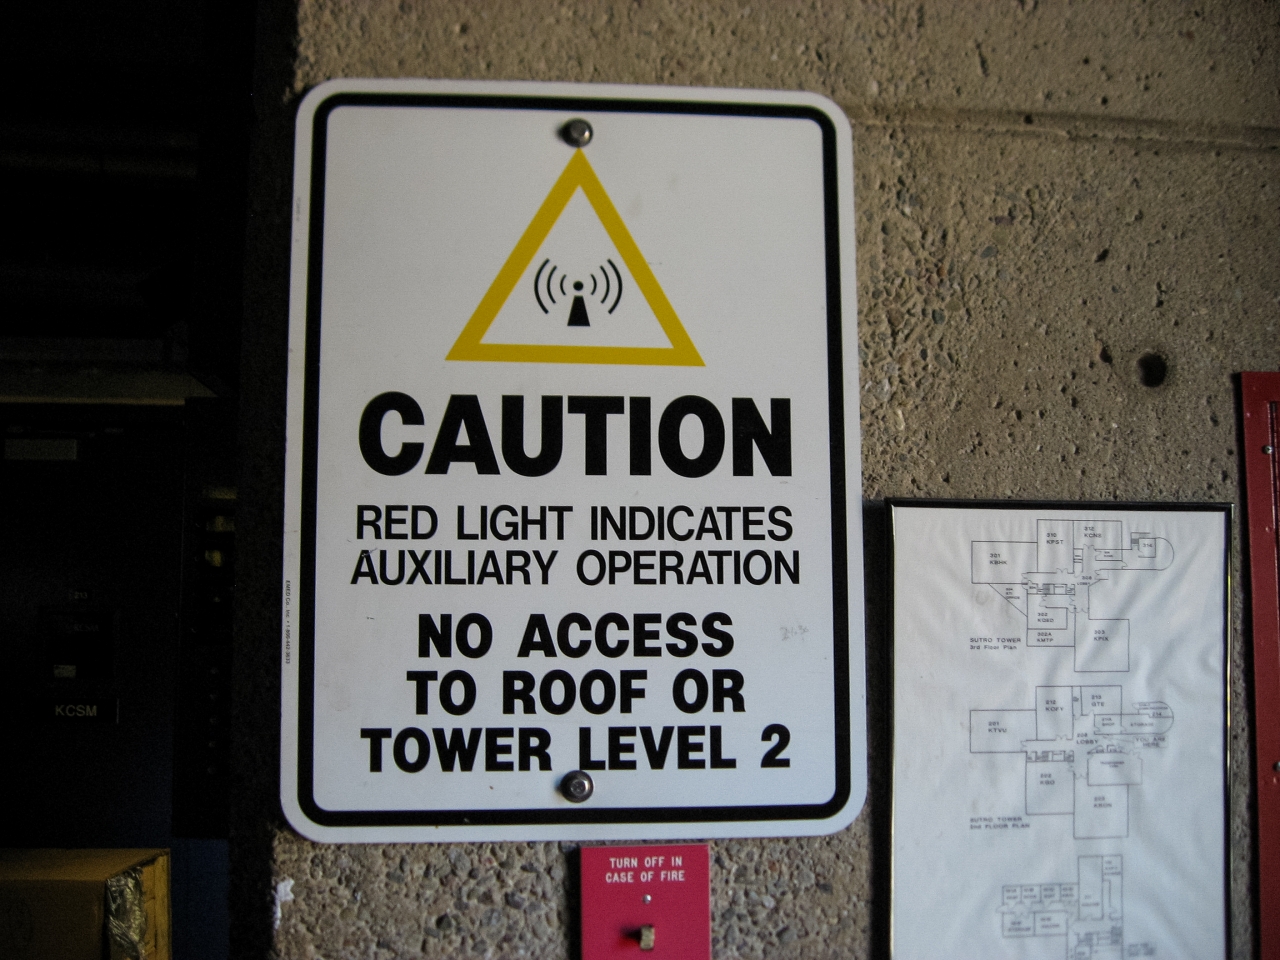 Auxiliary operation warning sign in the Sutro Tower building.